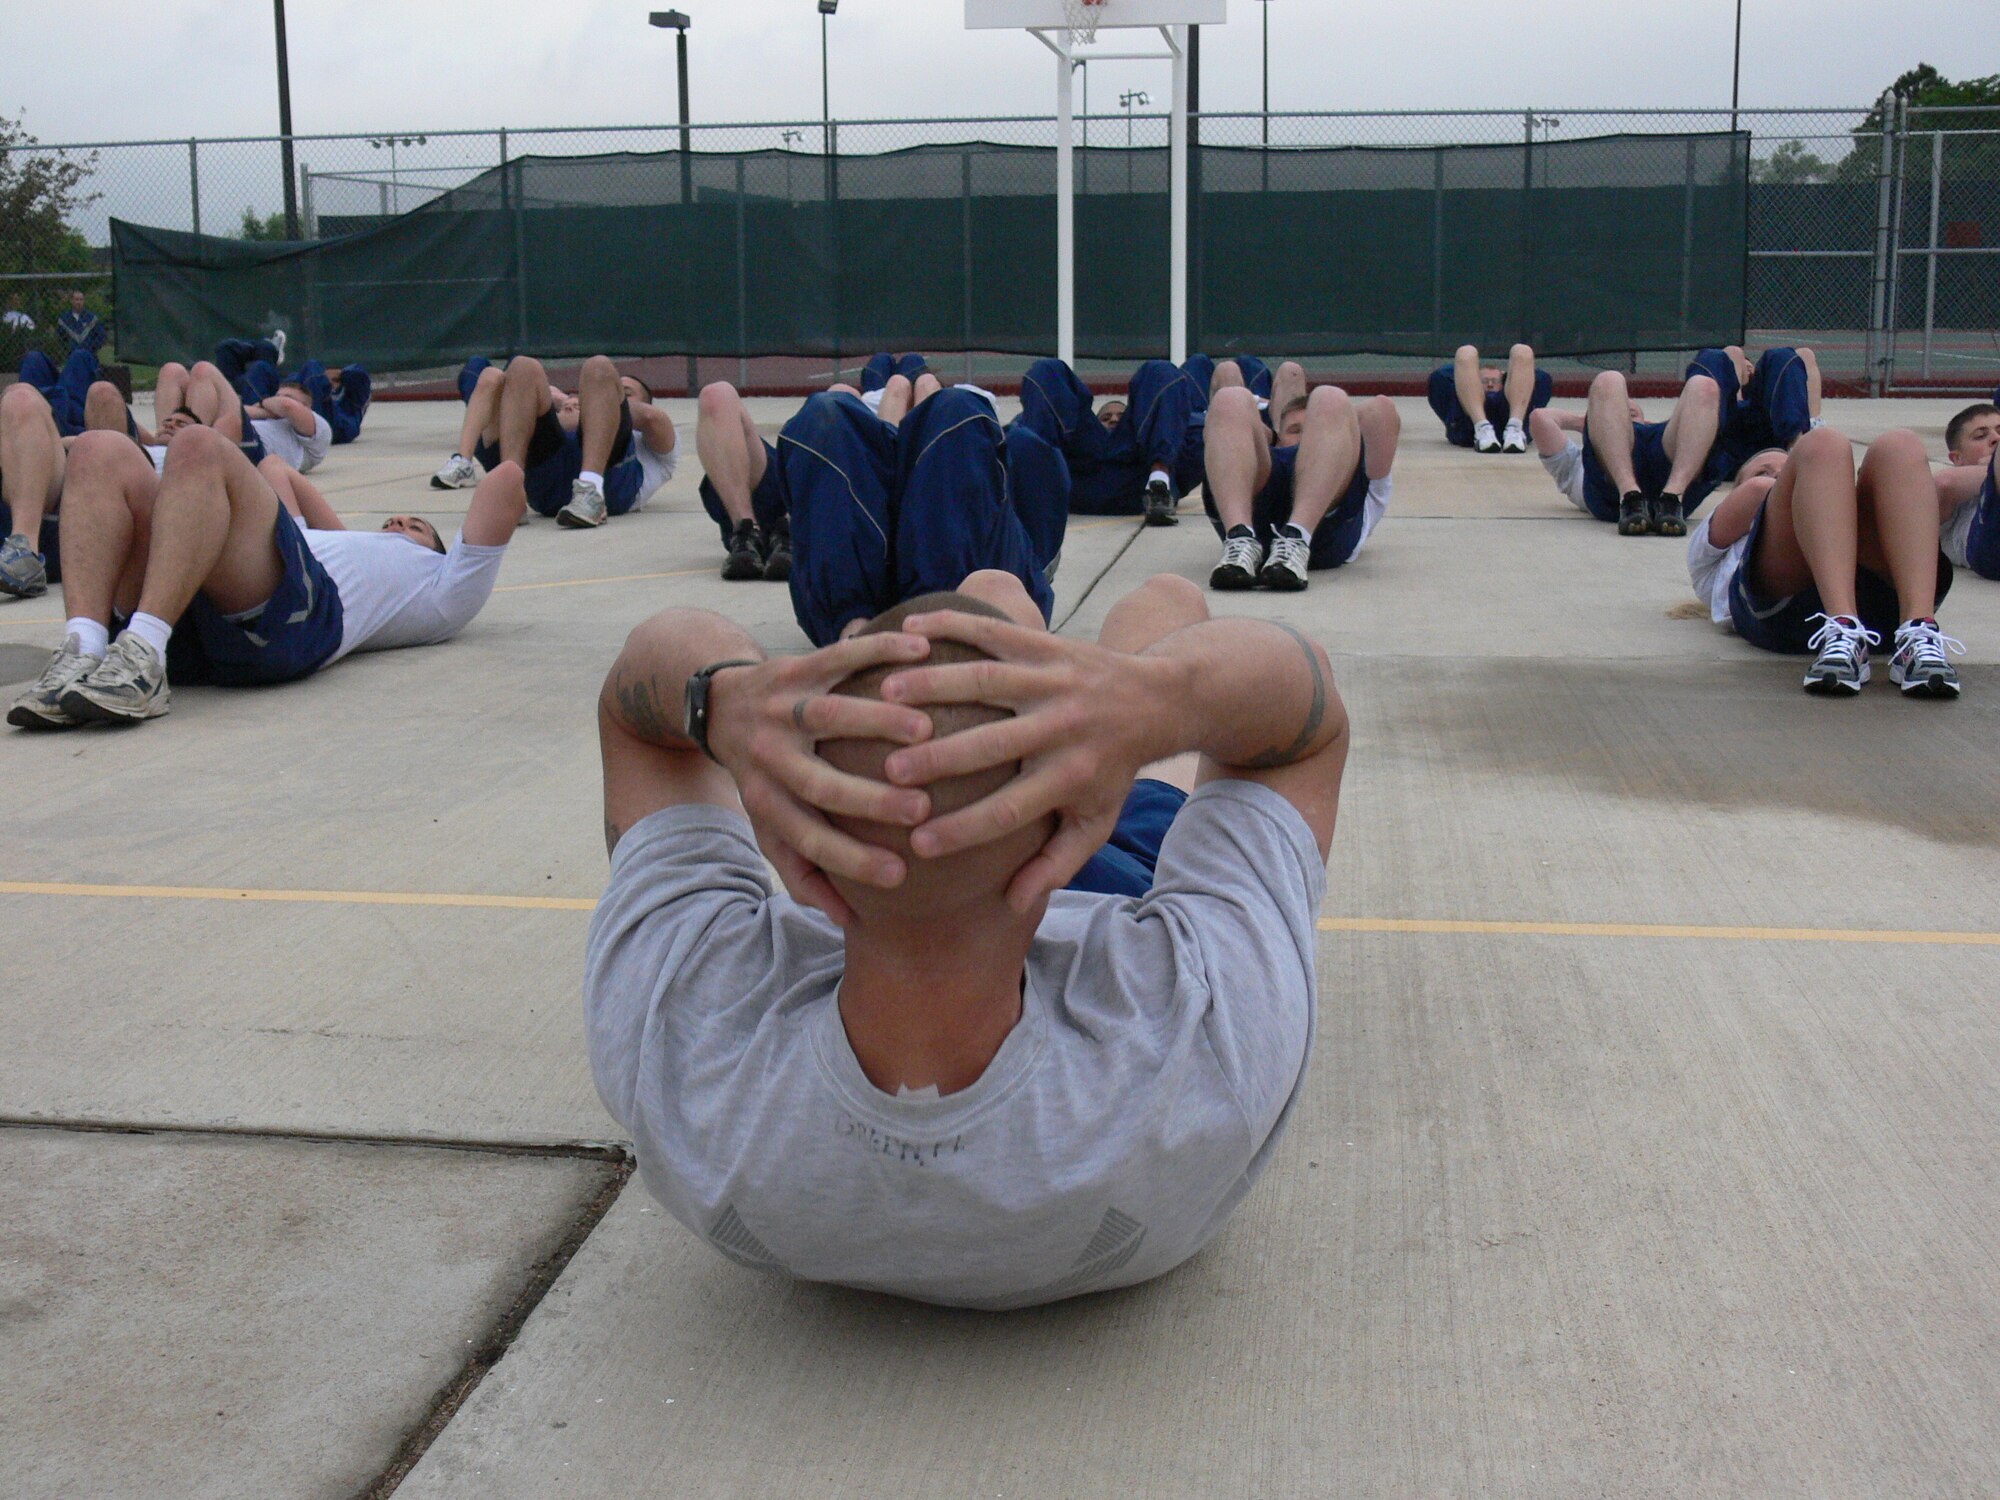 Master Sgt. Frank Green, 21st Security Forces Squadron, leads squadron physical fitness training June 14 on Peterson Air Force Base. The 21st SFS switched from 12-hour shifts to eight-hour shifts in April. The move is part of the new integrated defense plan, which changes how the squadron polices the base and how it uses its resources. The new eight-hour shifts allowed the squadron to have unit PT once again. (U.S. Air Force photo/Monica Mendoza)